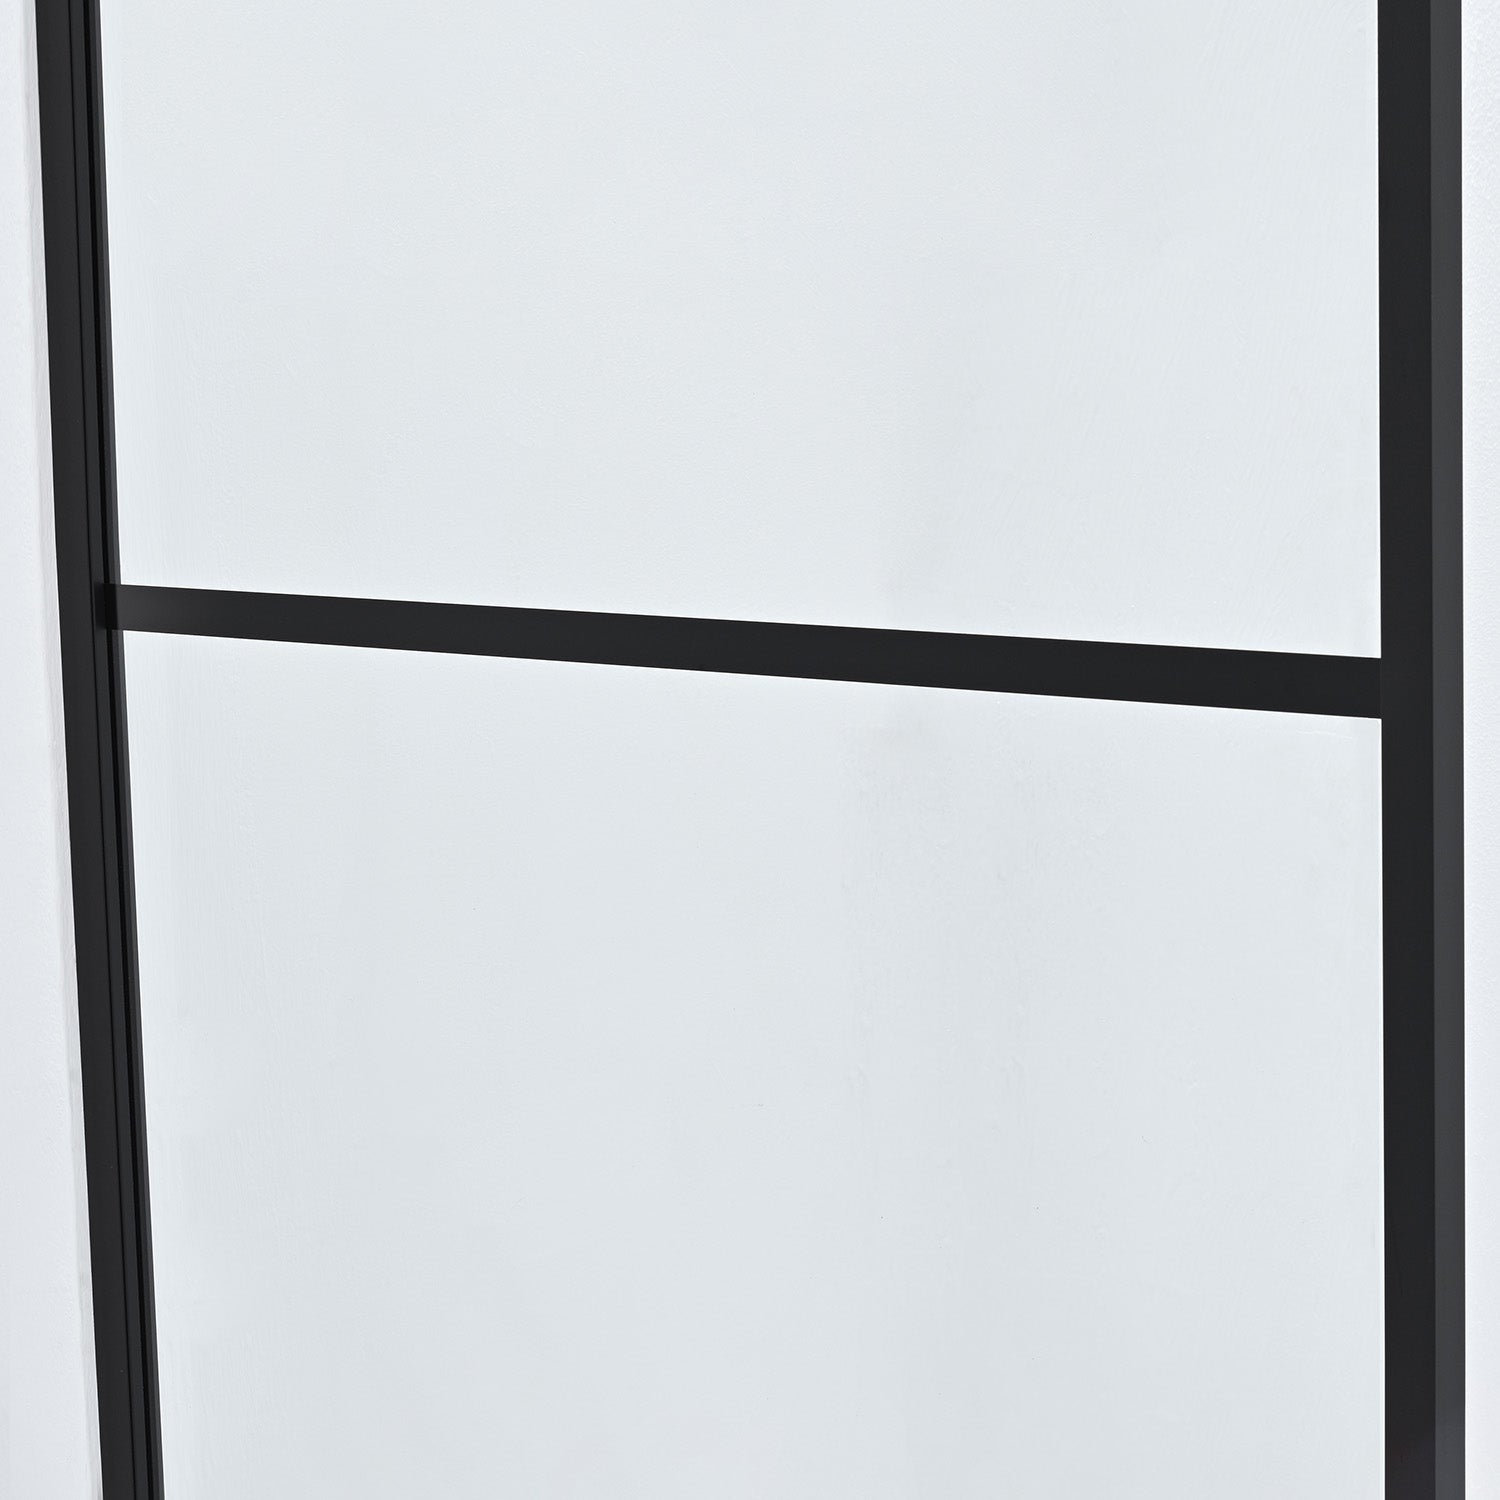 Puerto 34" W x 74" H Framed Fixed Glass Panel in Matte Black